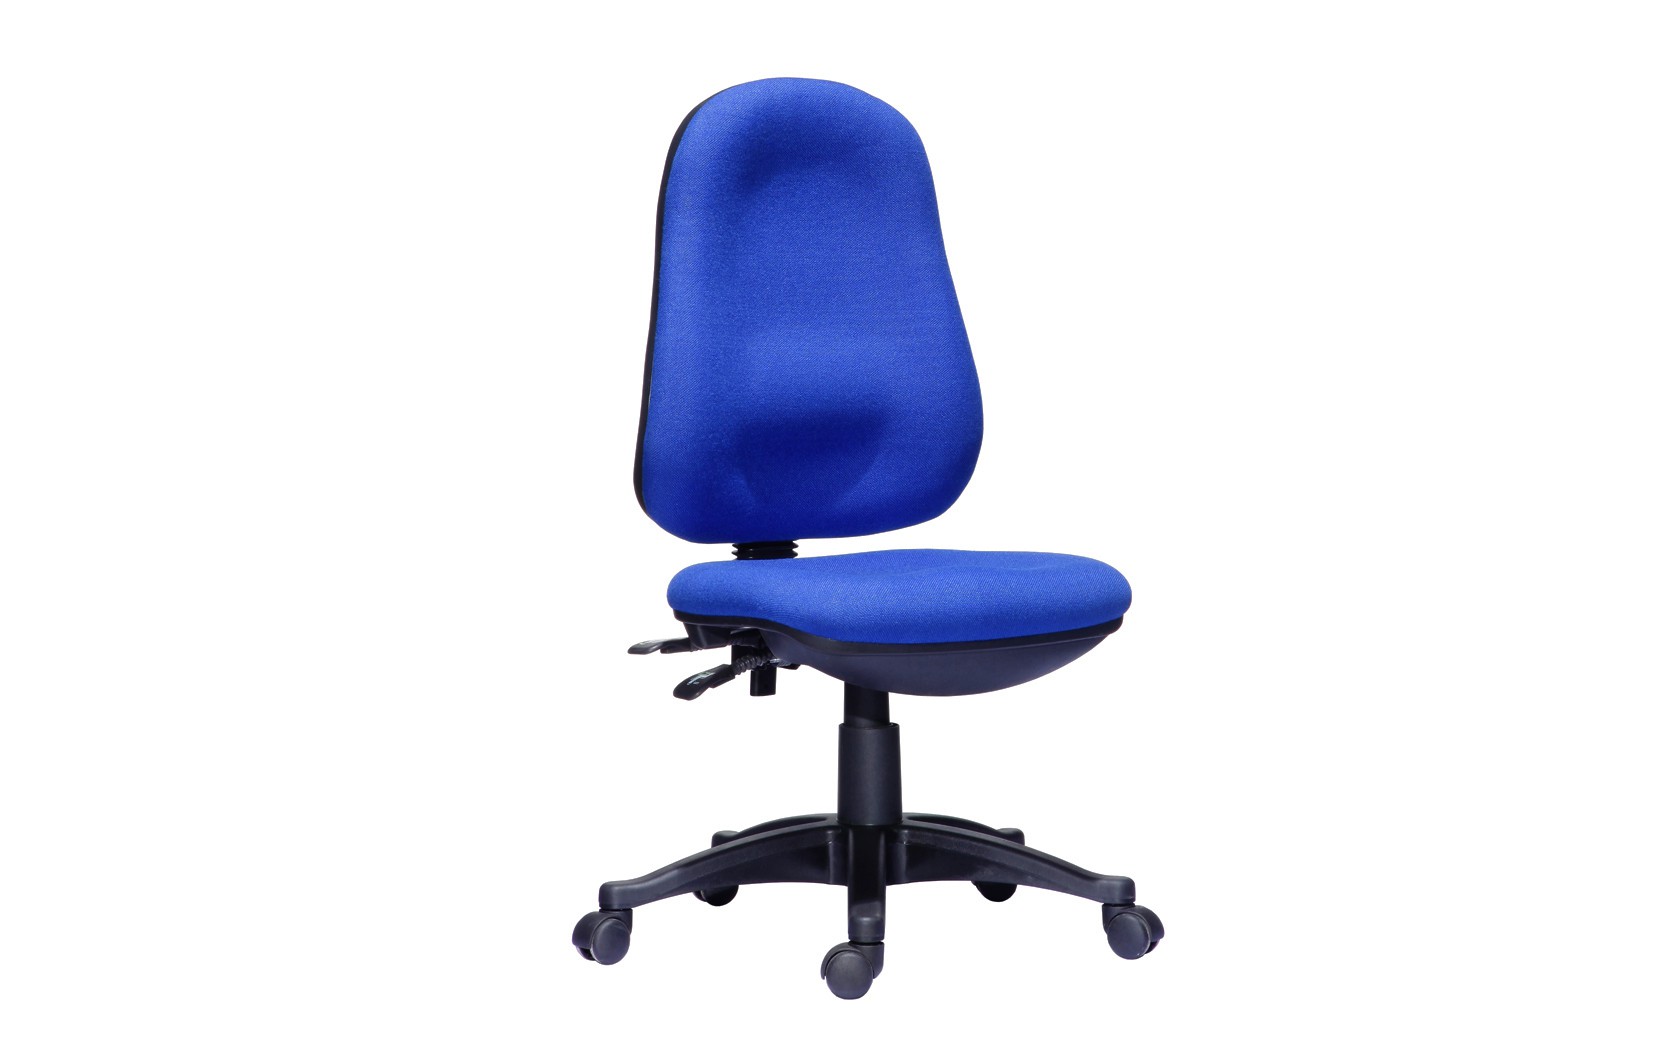 High+Back+Twin+Lever+Operator+Chair%2C+UK+Gas+Height%2C+640+Base%2C+Royal+Blue+Fabric